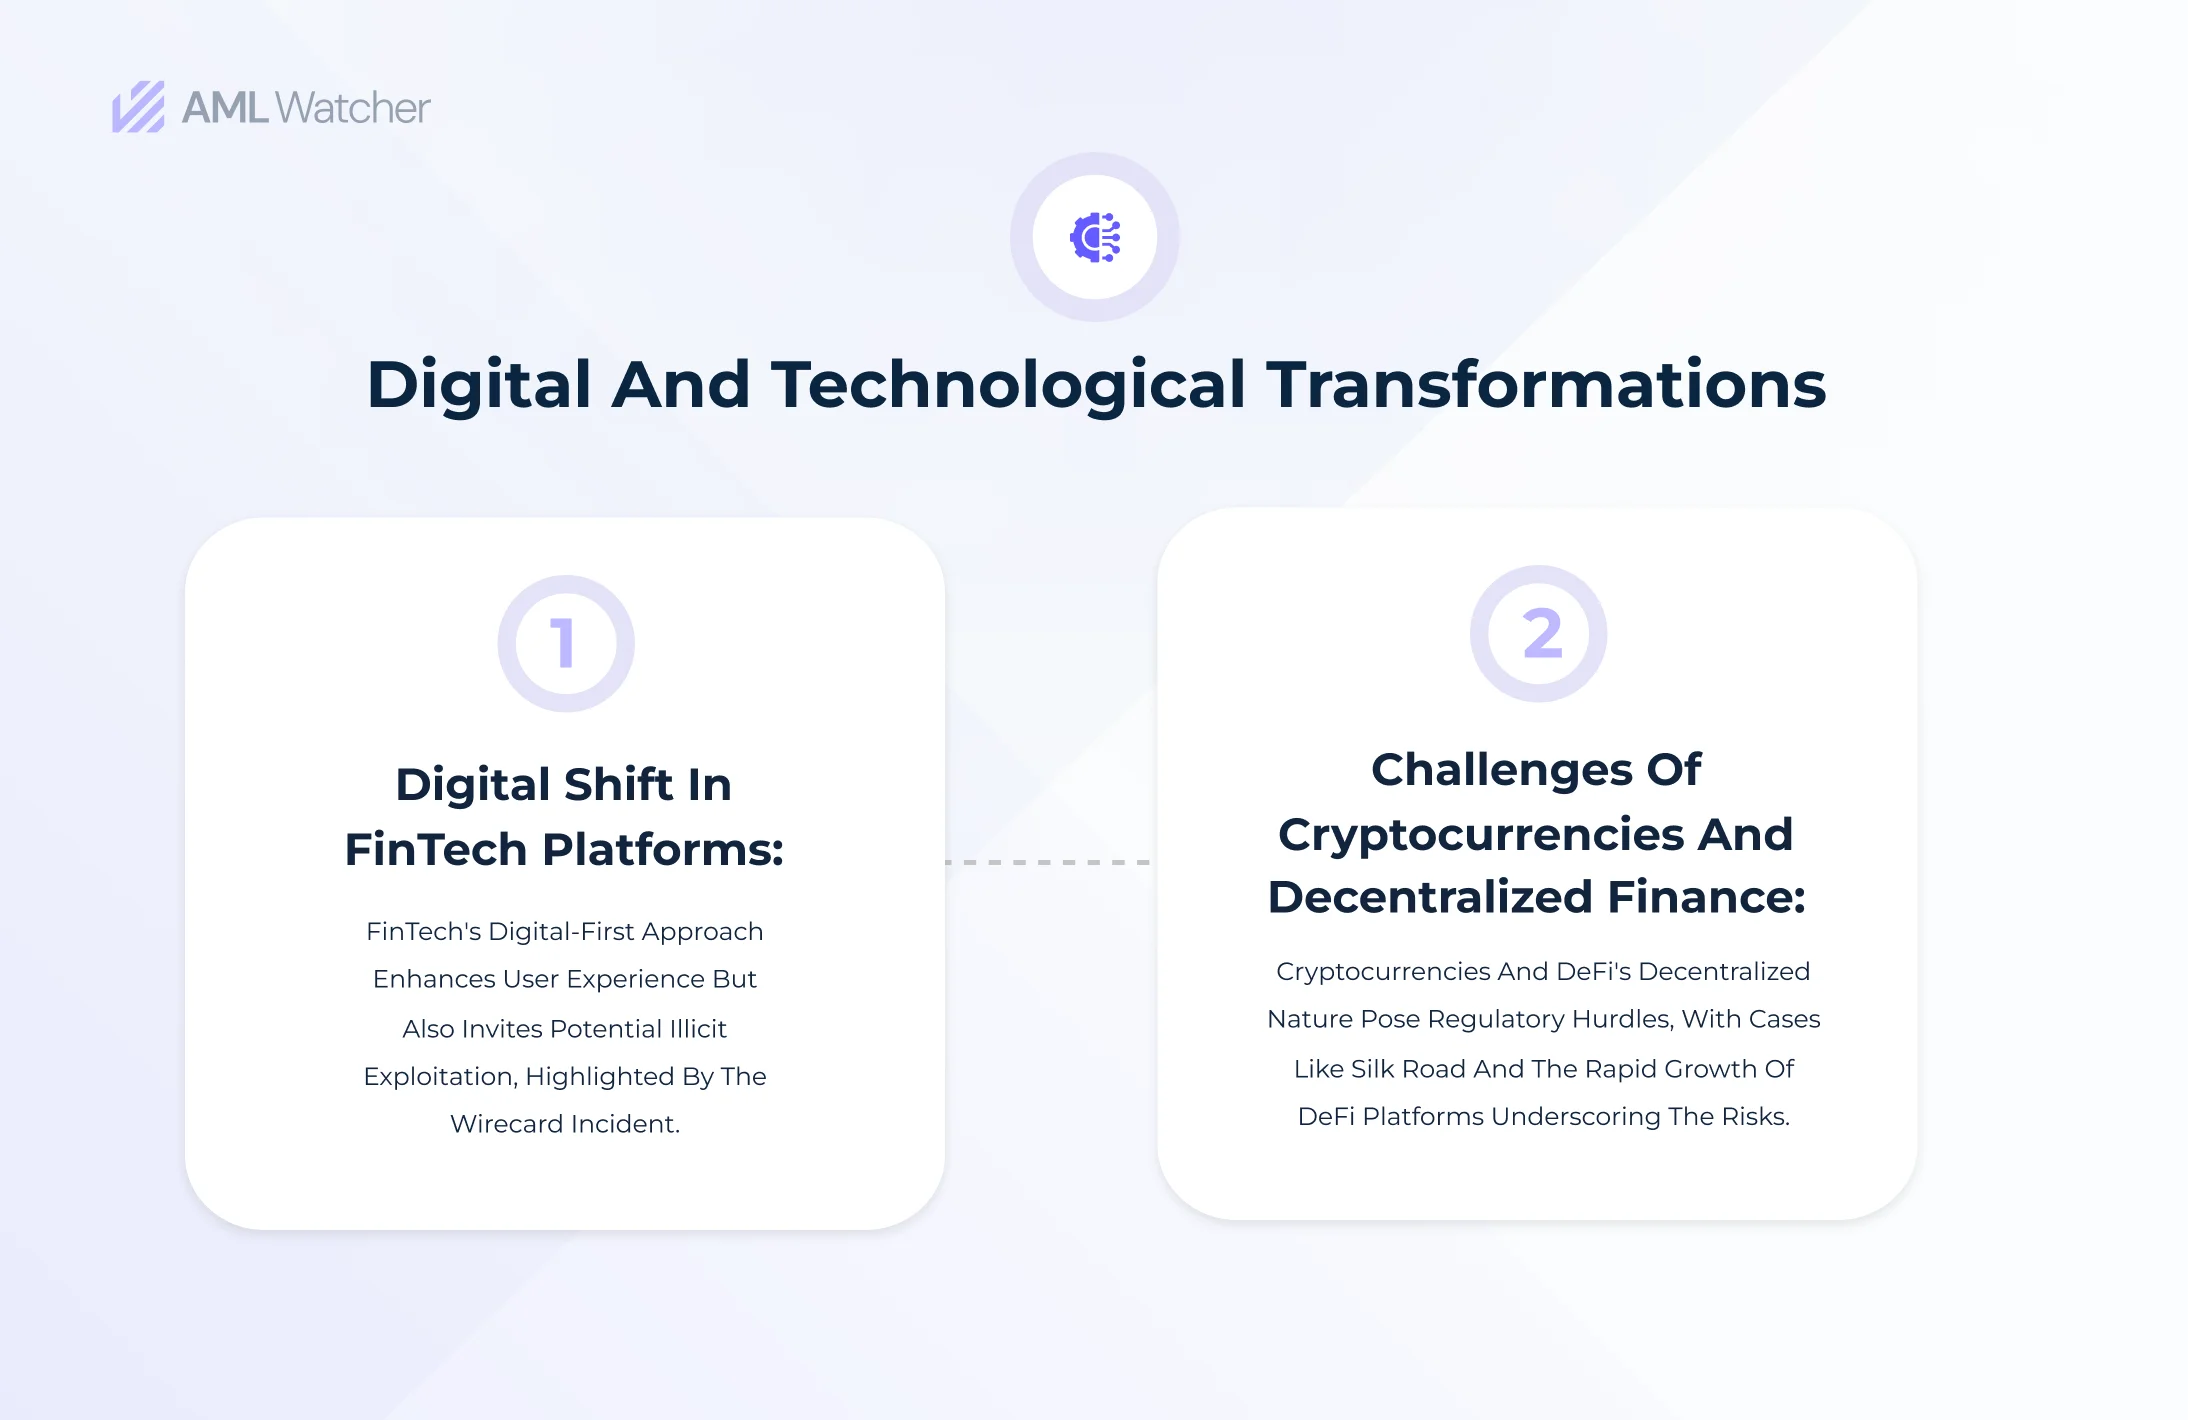 Digital Transformations: FinTech's shift brings both user benefits & risks, while crypto & DeFi present regulatory challenges.